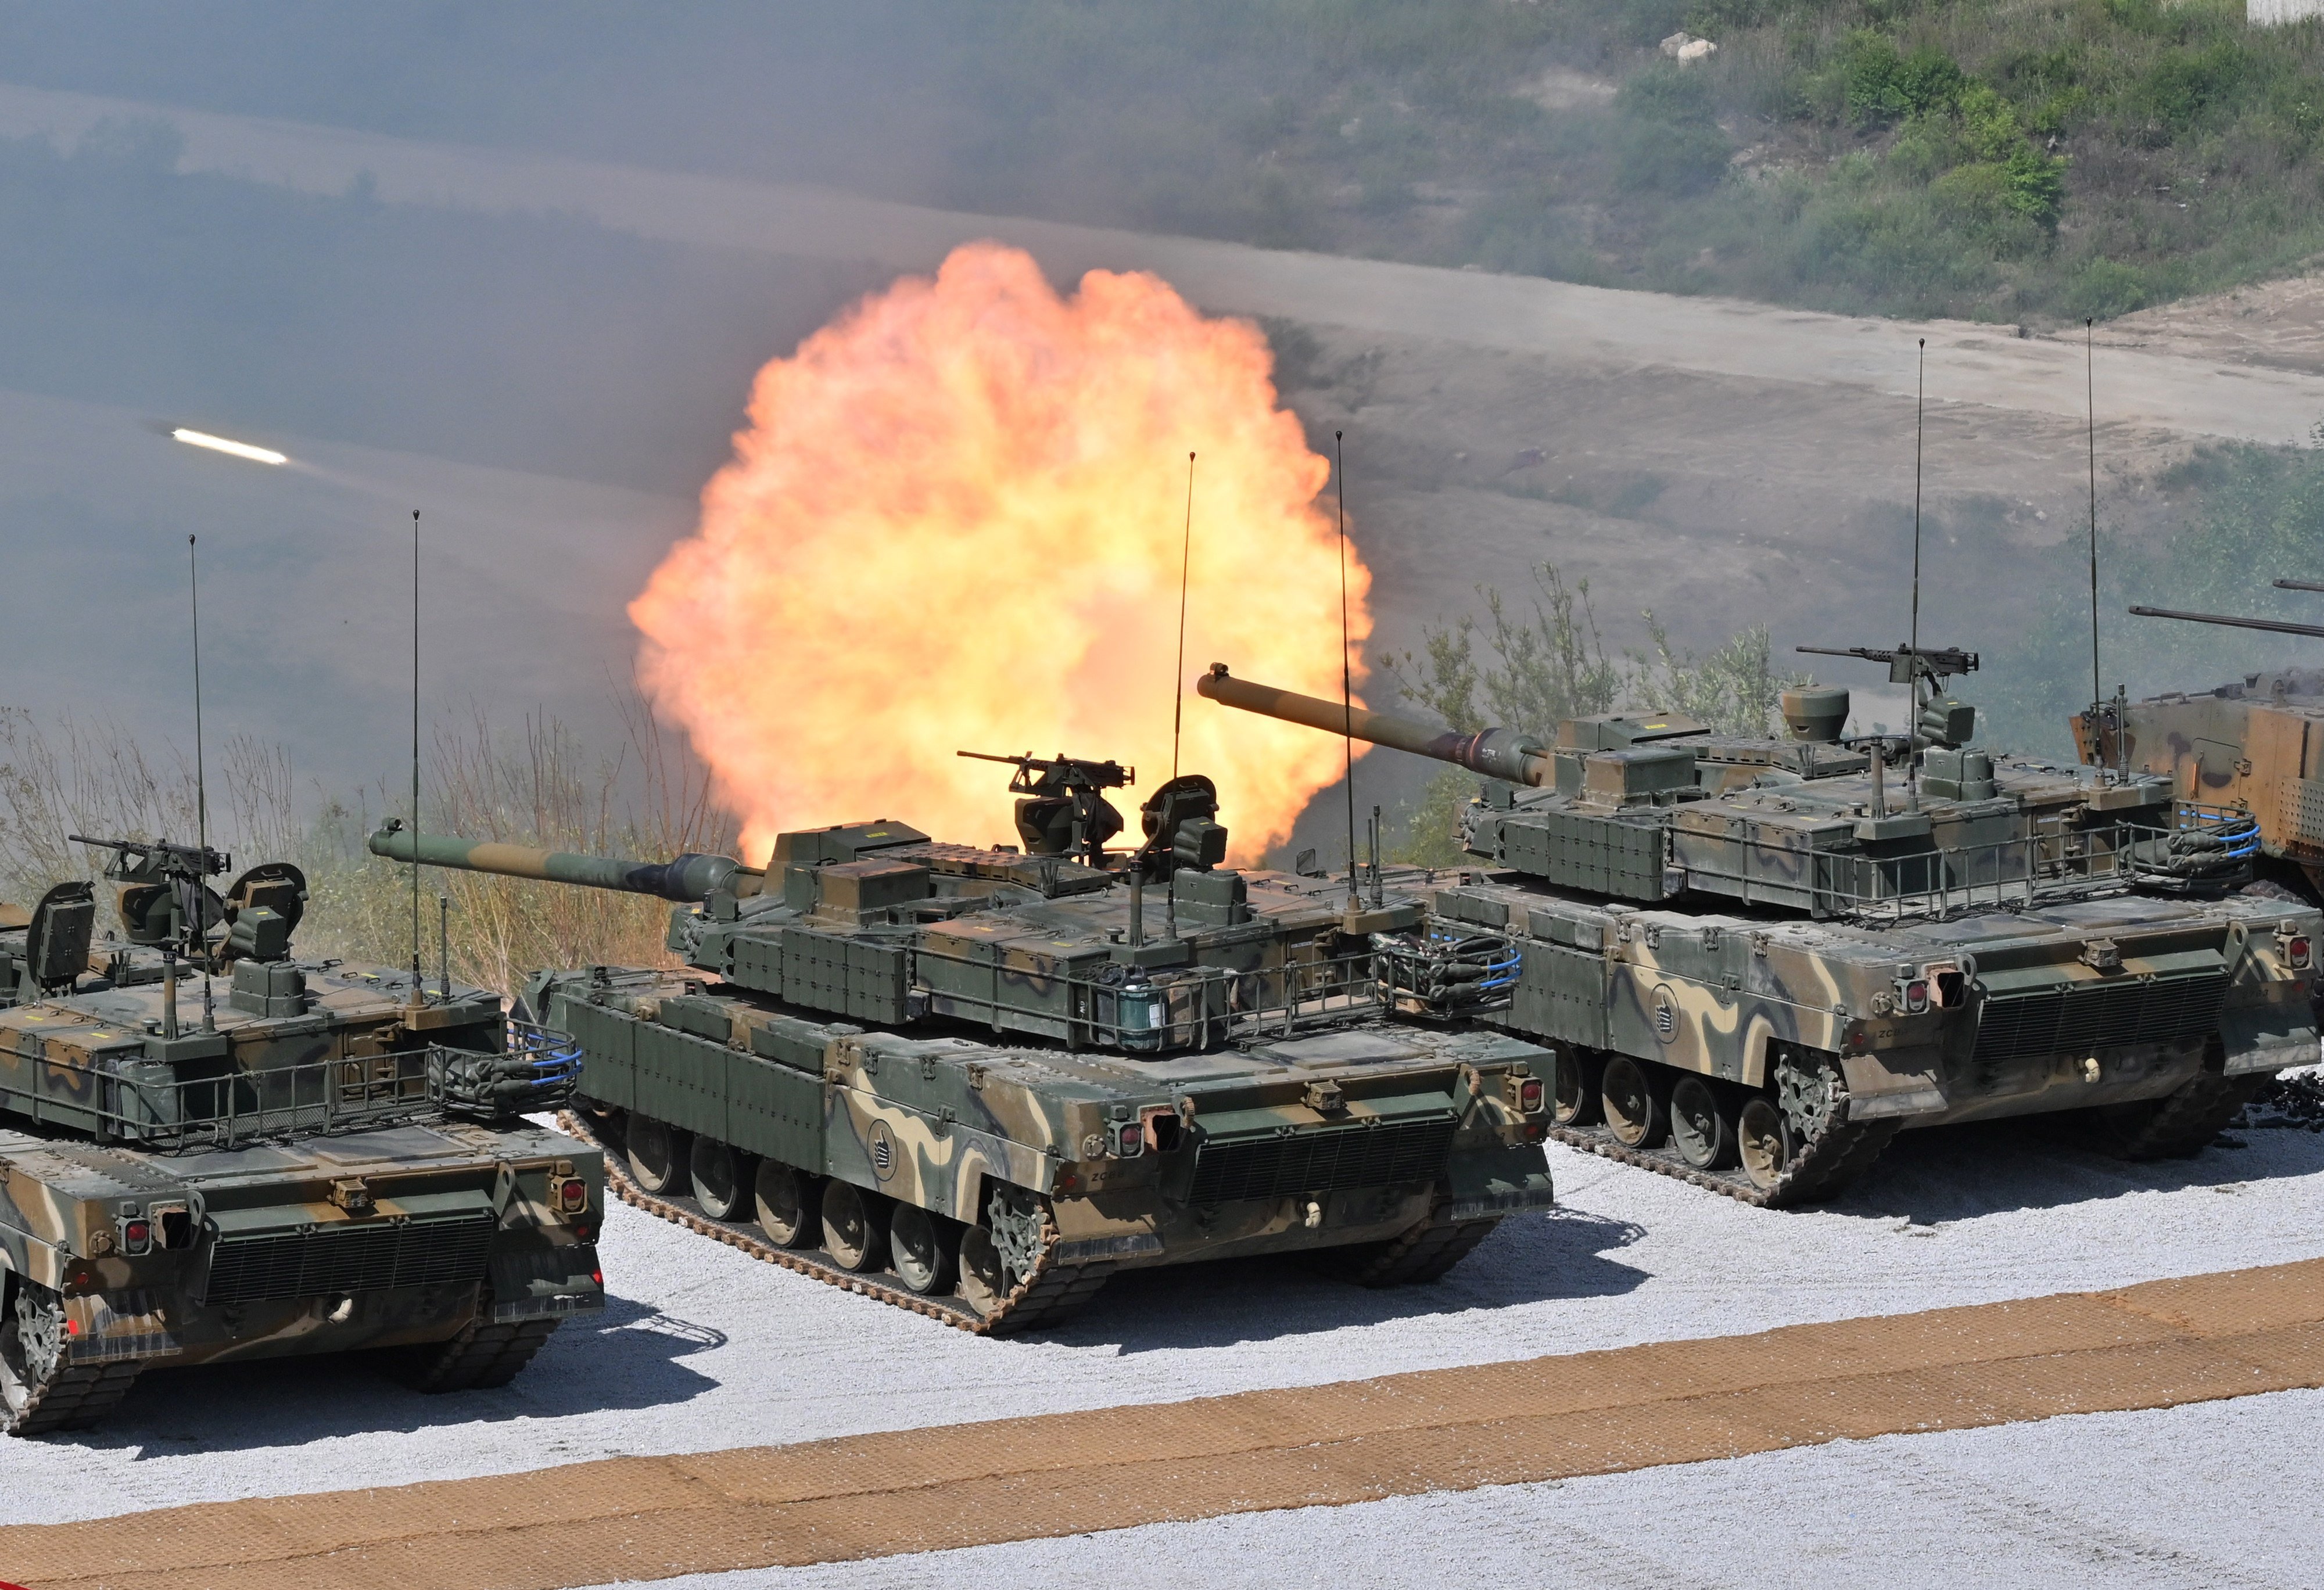 South Korean K-2 tanks fire during a joint South Korea-US military drill at the Seungjin Fire Training Field in Pocheon, South Korea, on June 15. Keeping the military onside is an essential task for any ruler hoping to defend their country’s national interests and expand their influence. Photo: EPA-EFE